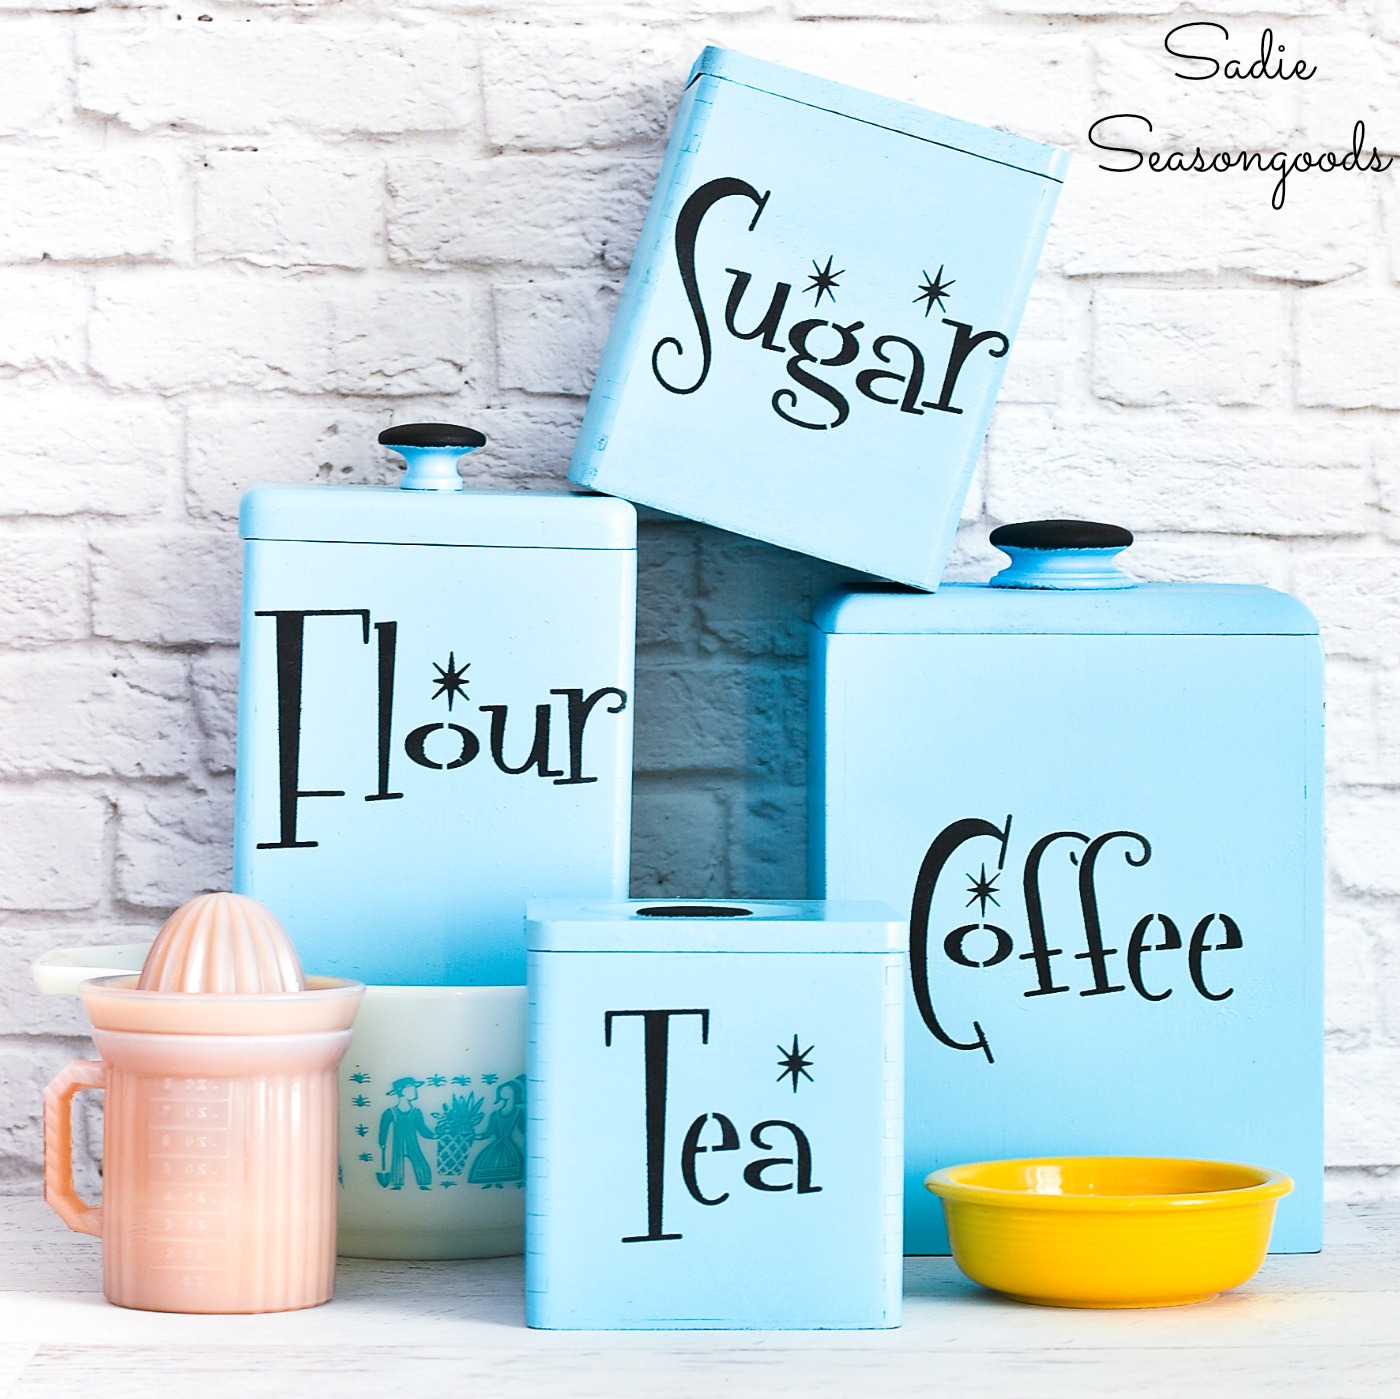 Retro canisters with a mid century modern font for aqua kitchen decor